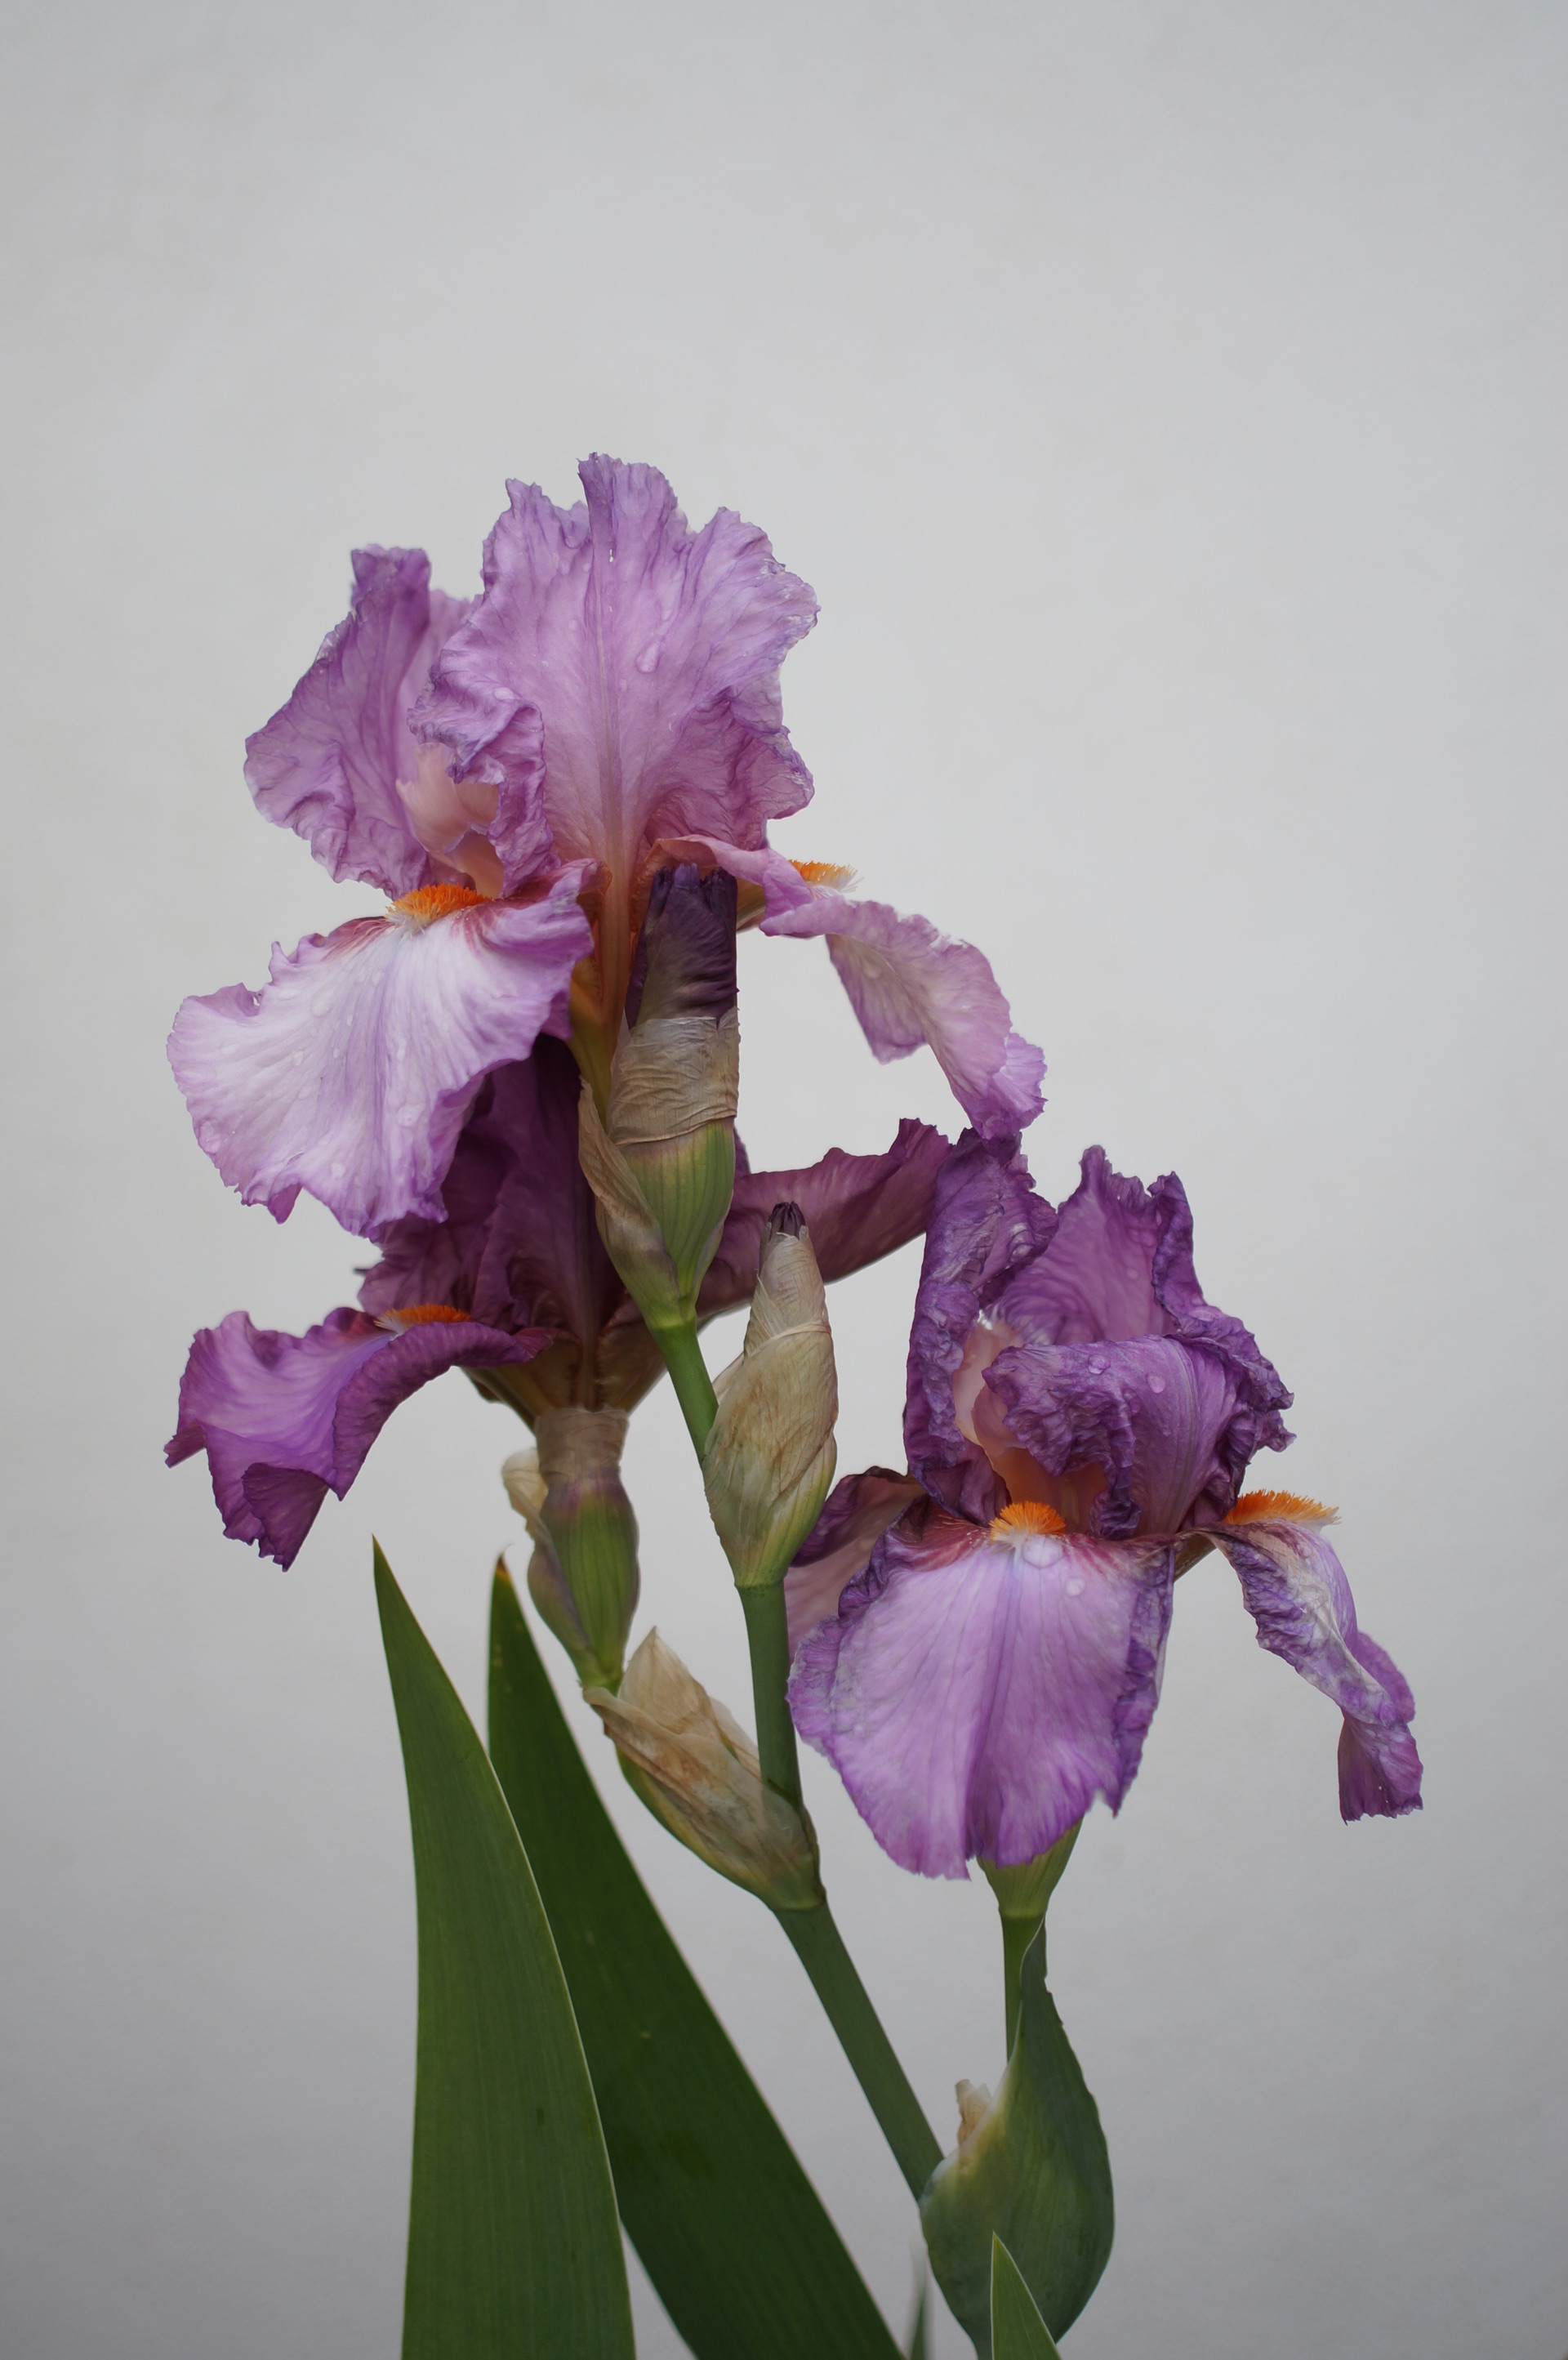 Purple bearded iris flowers and buds against a white wall